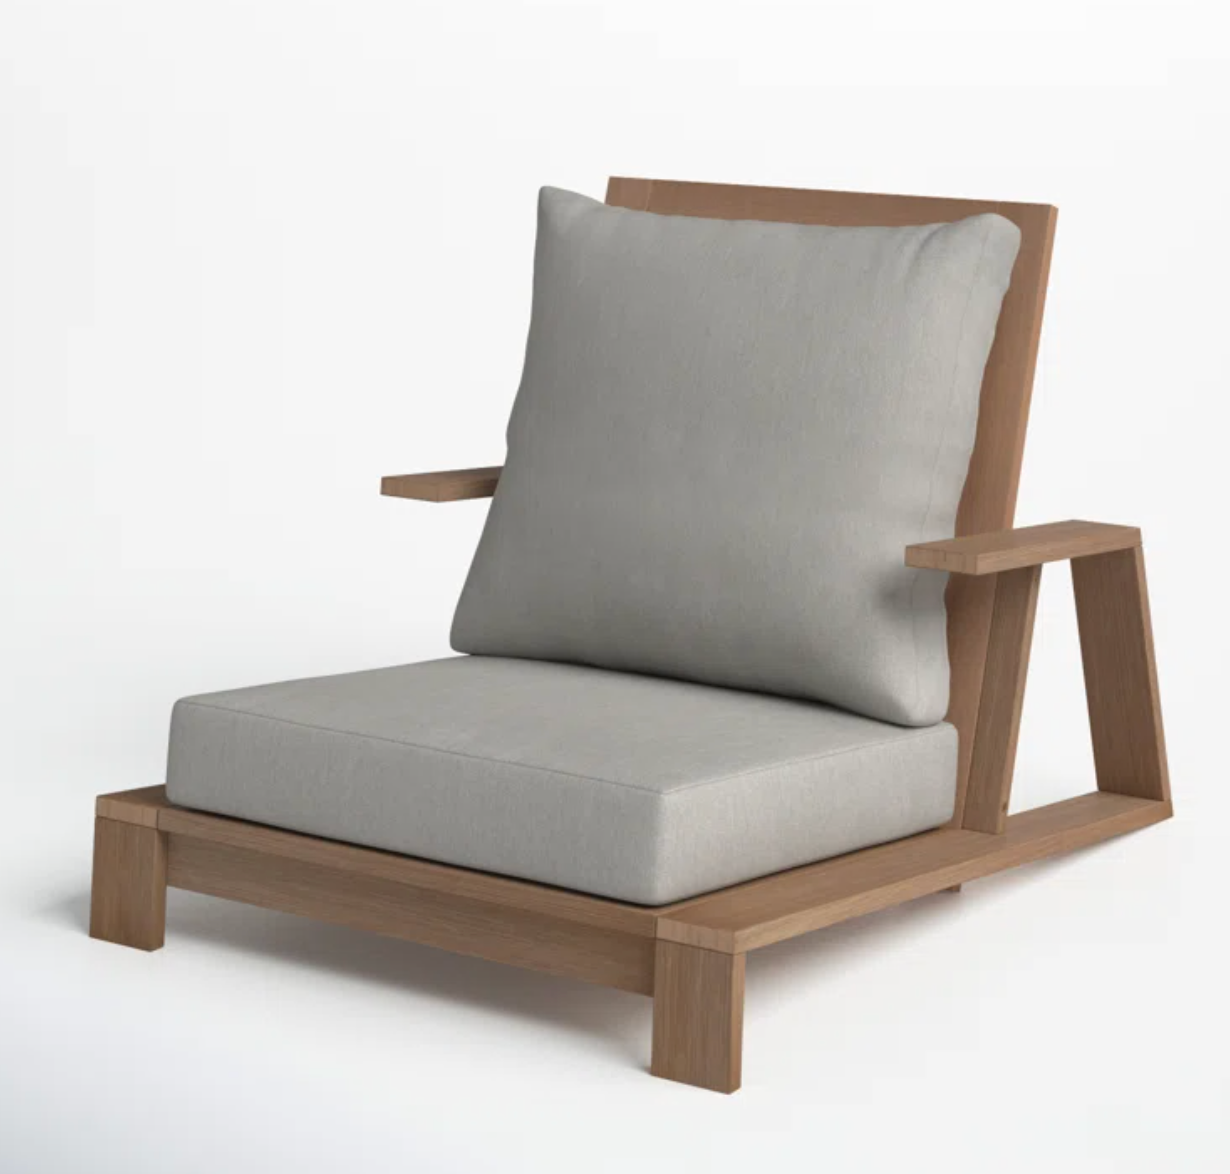 TEAK WOOD LOUNGE CHAIR WITH BEIGE LINEN CUSHIONS